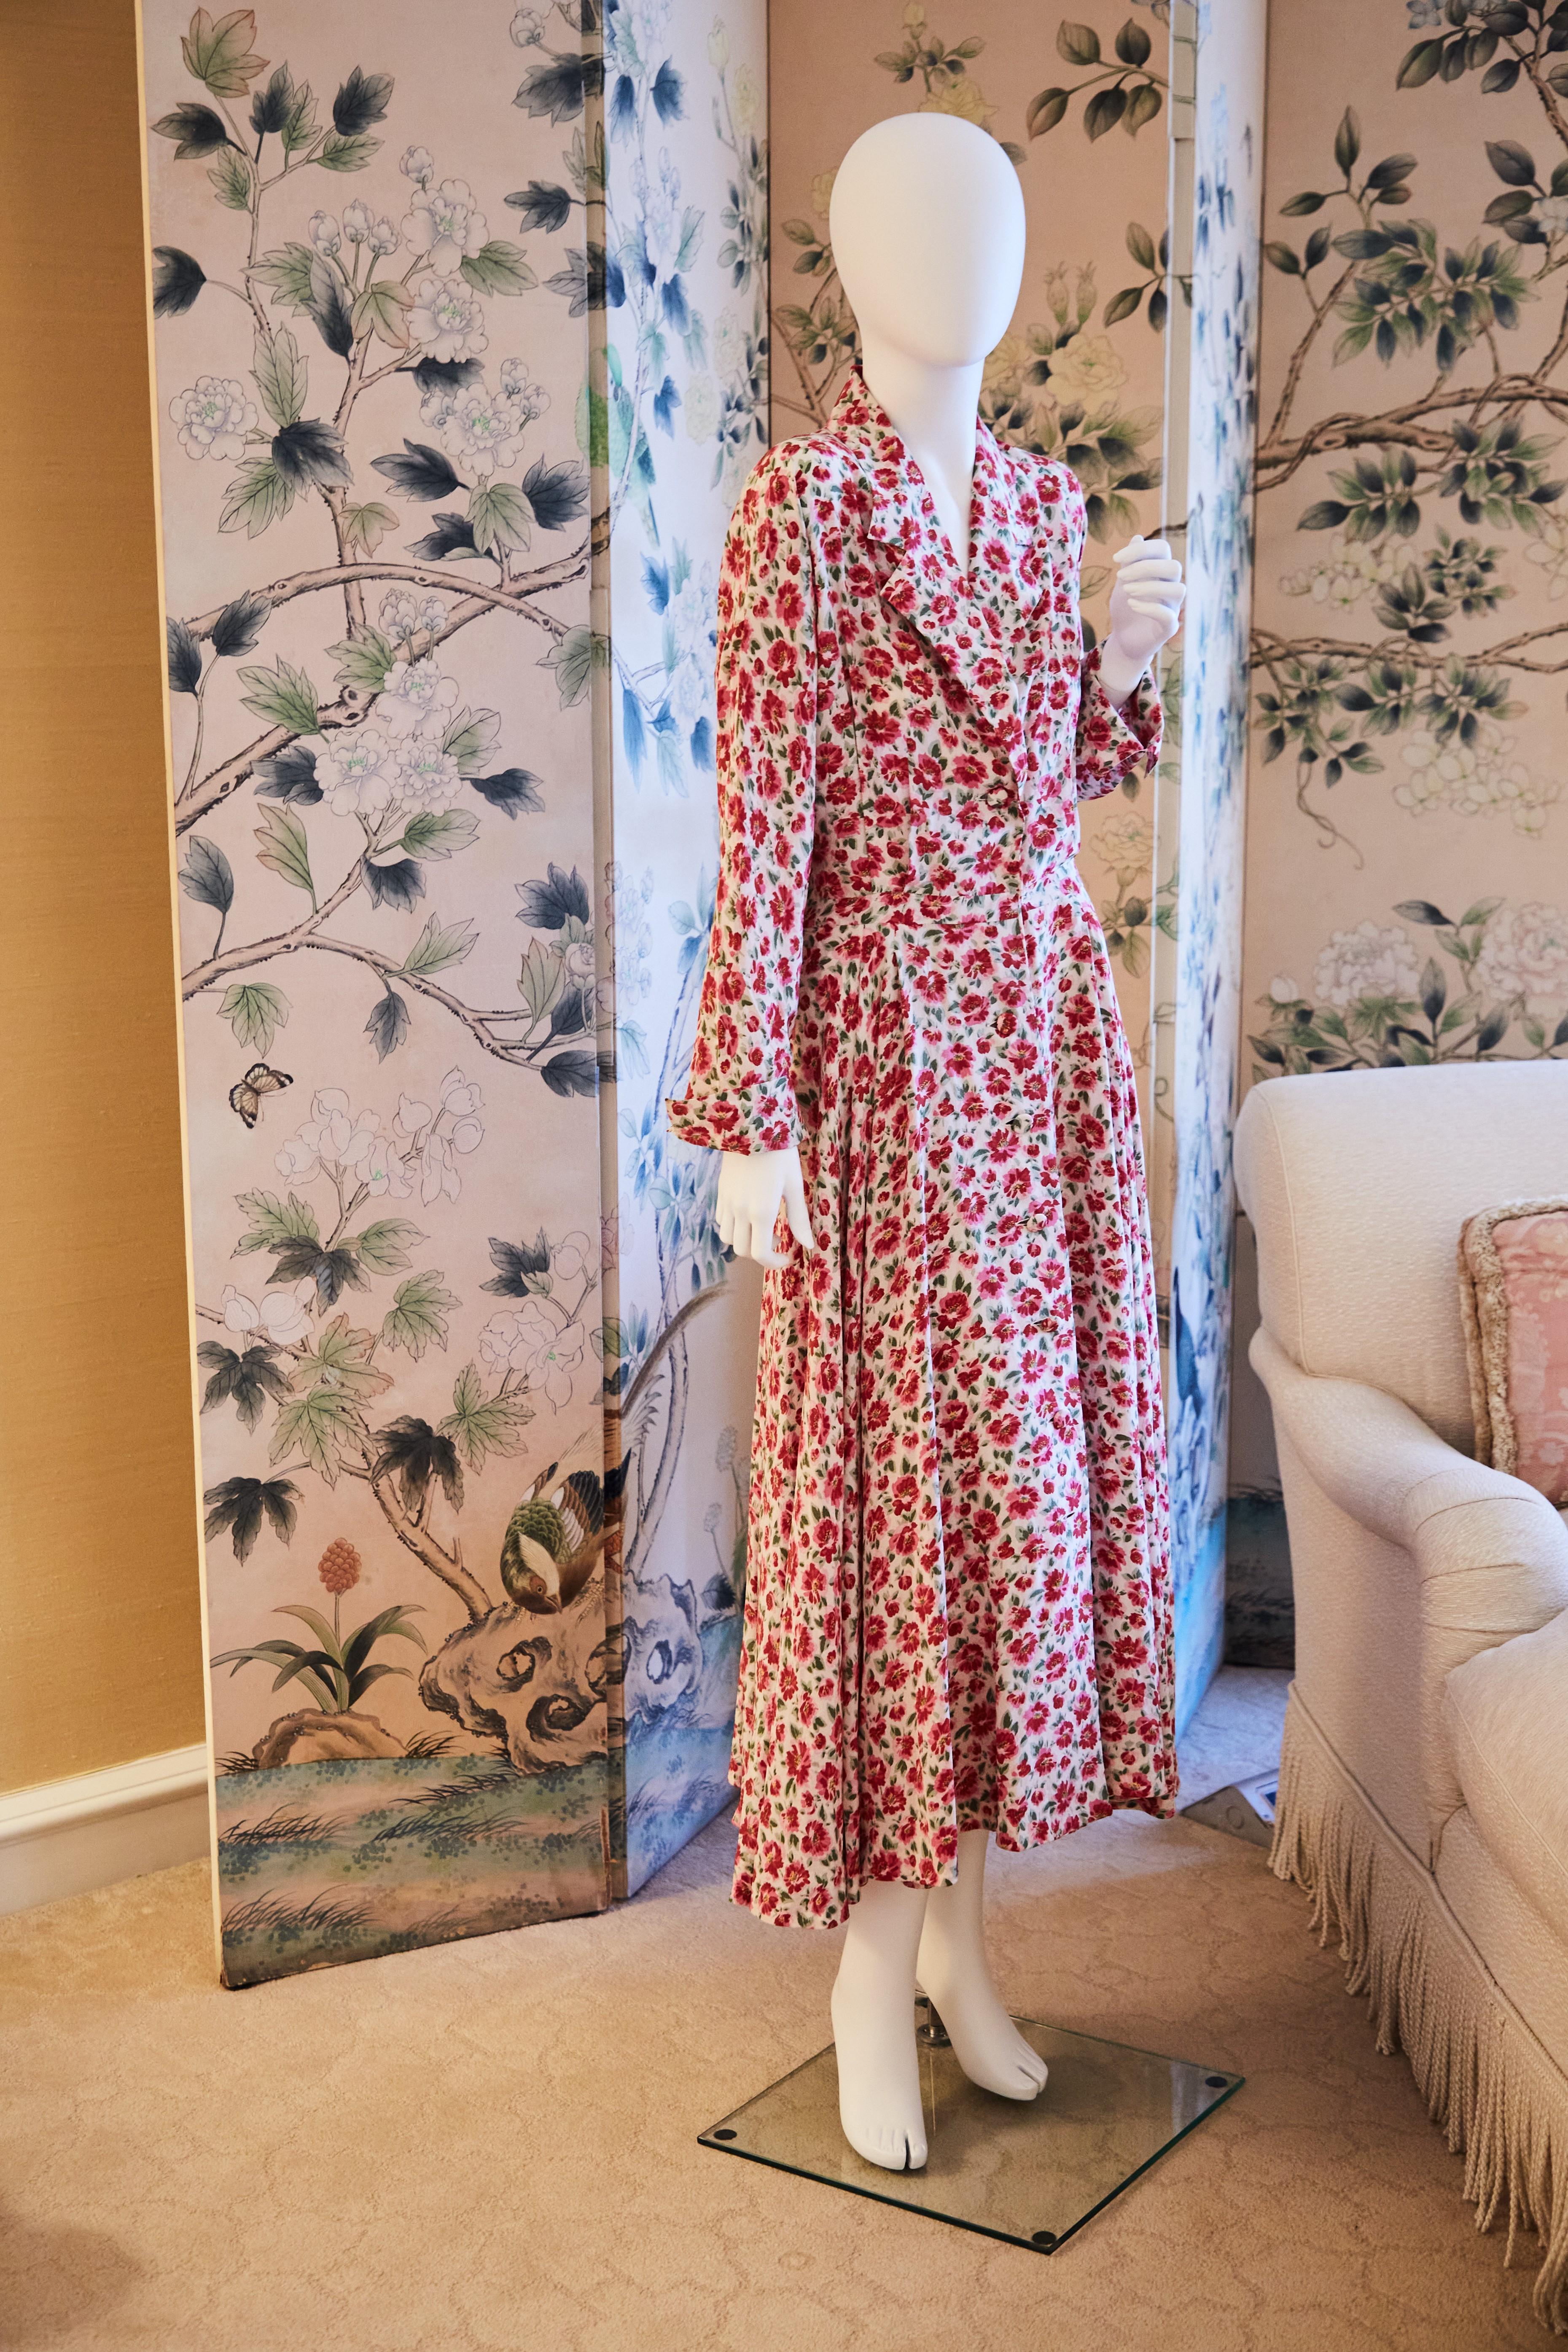 a mannequin is wearing a red and white floral dress